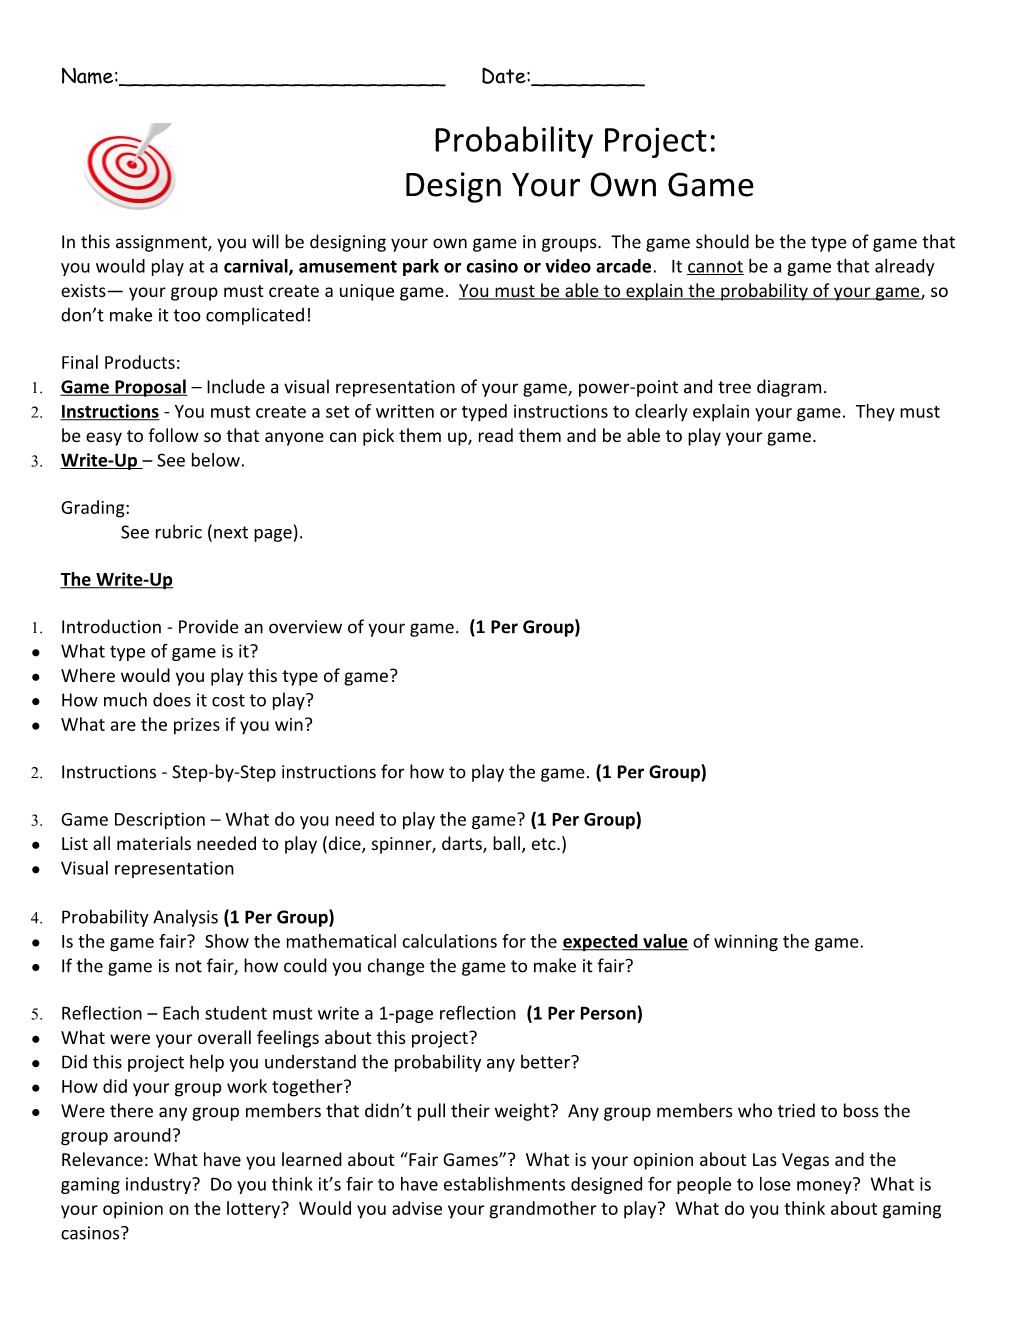 Design Your Own Game